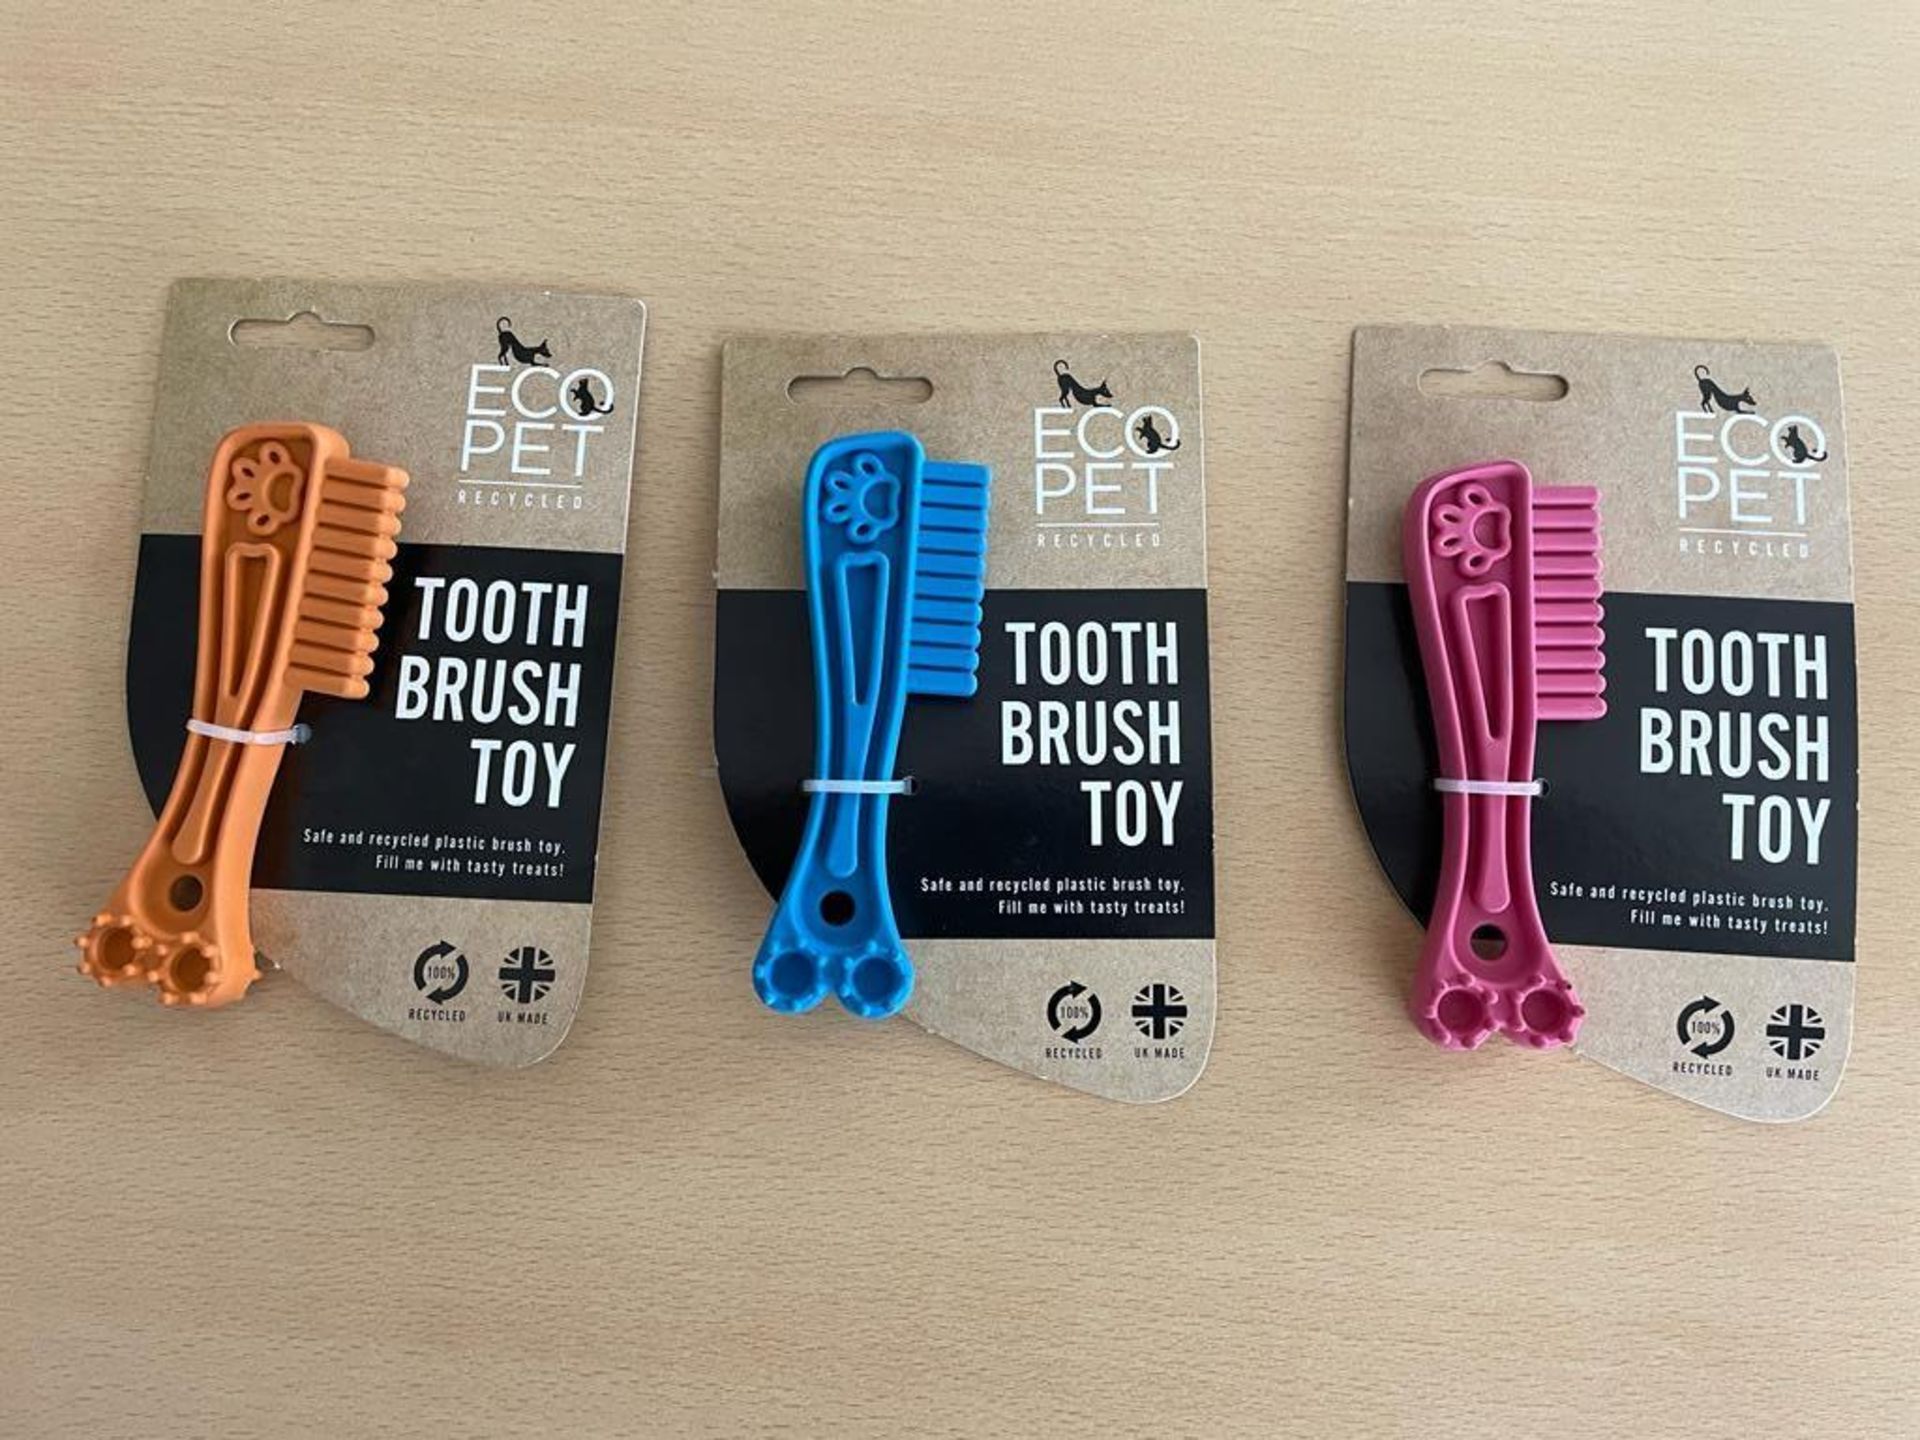 312 toothbrush shaped dog chew toys in assorted colours. Made in the UK from recycled polymer, bran